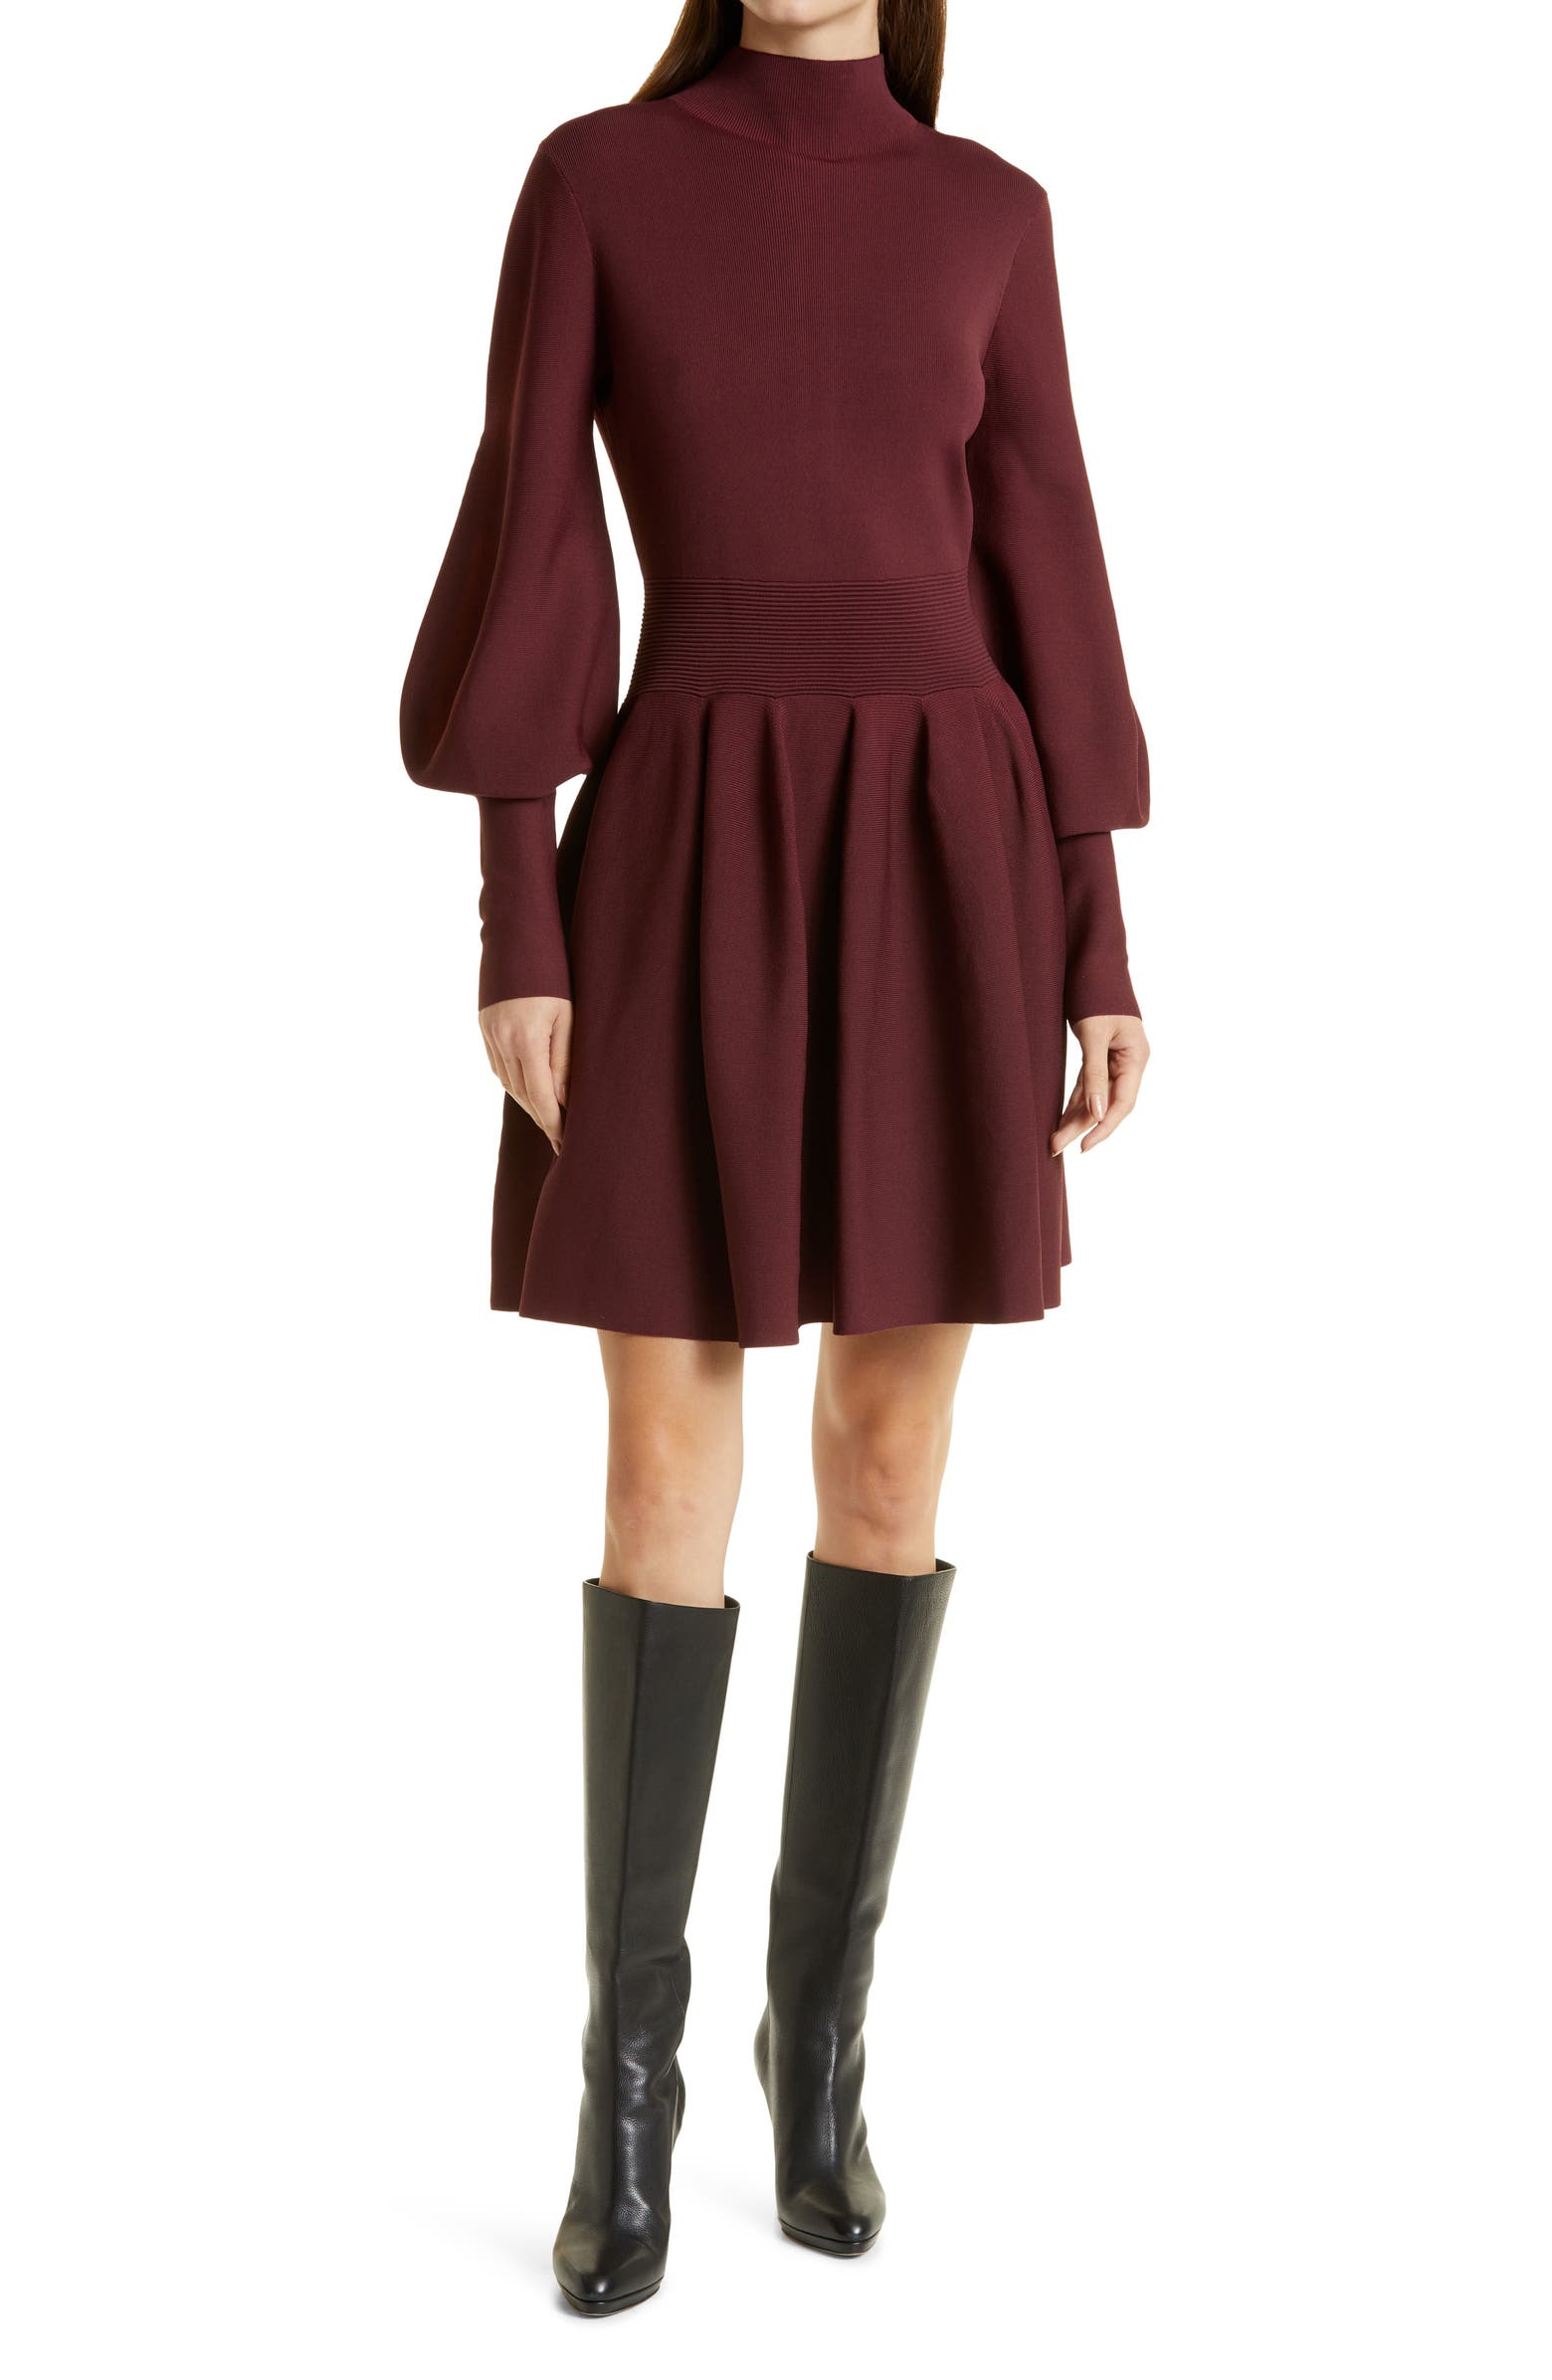 Burgundy Ted Baker dress with long balloon sleeves